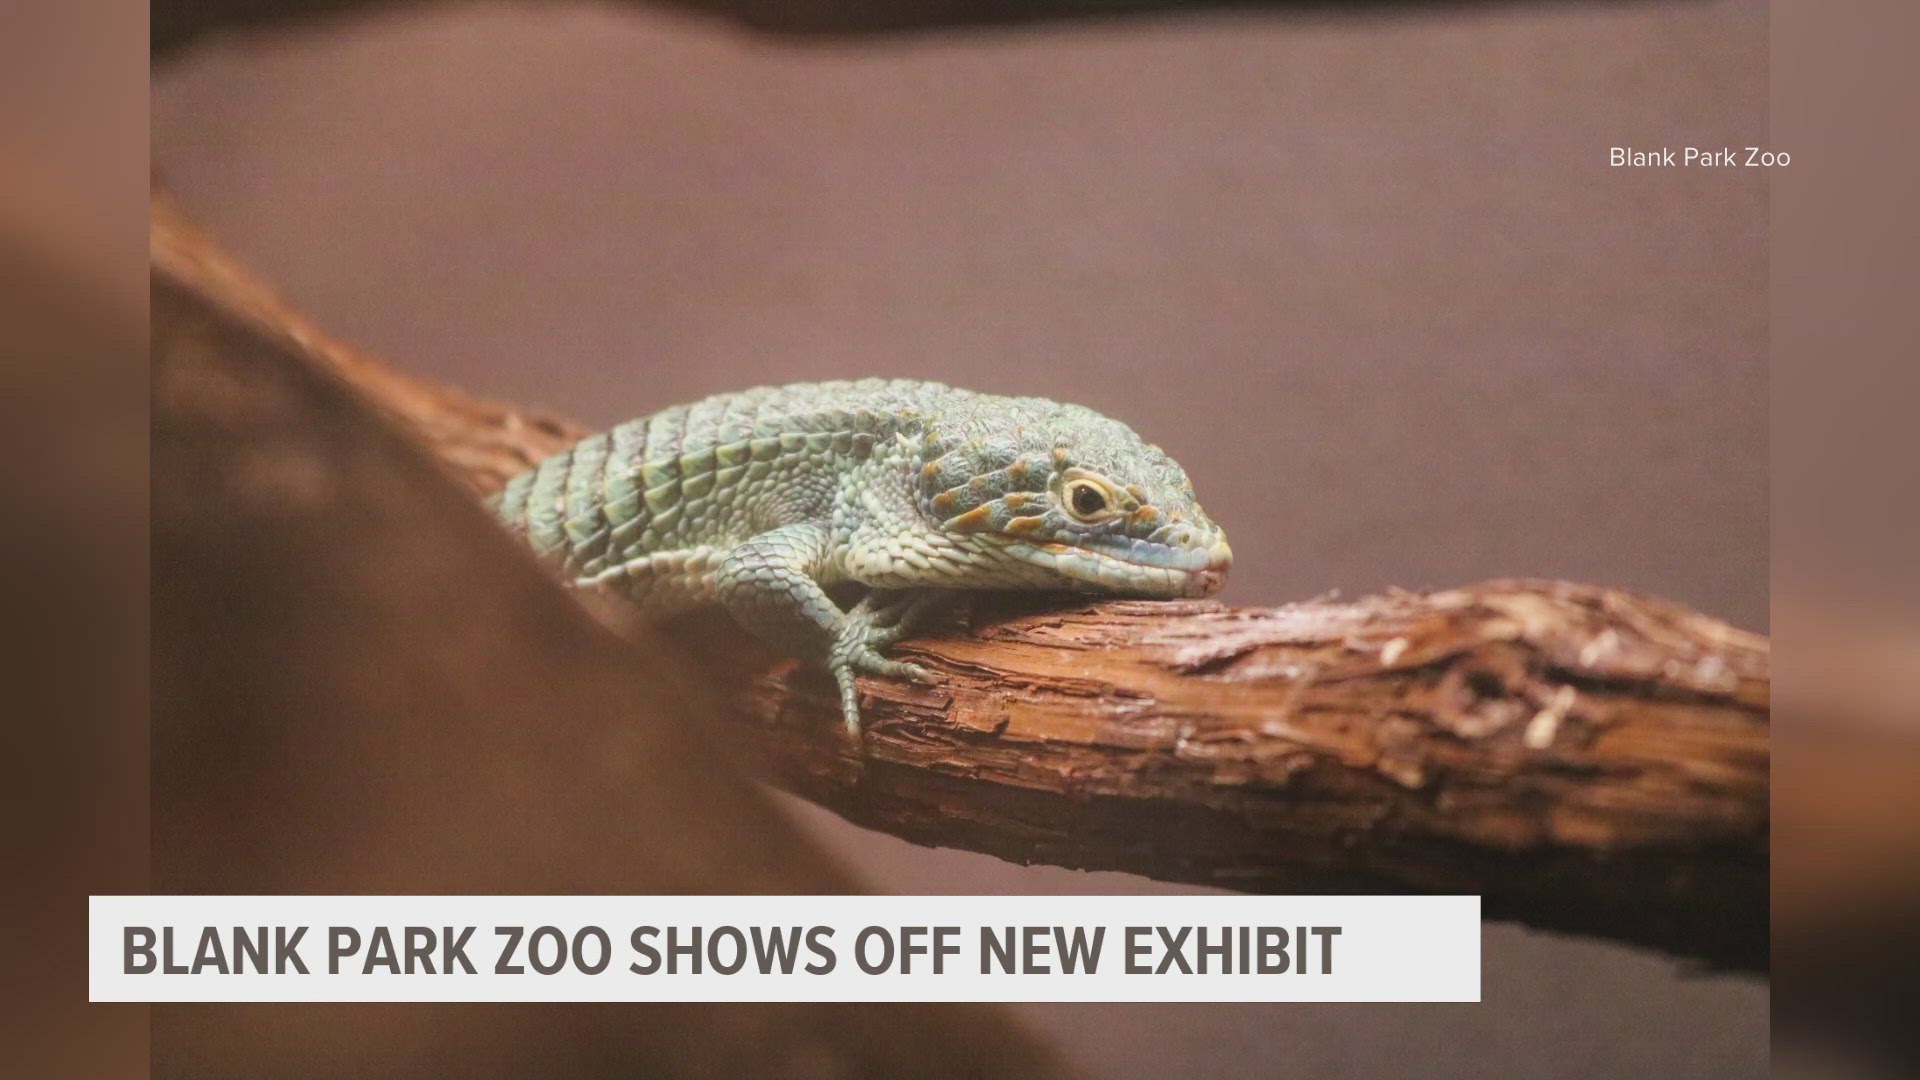 The zoo plans to have the exhibit rotate to offer new things consistently.